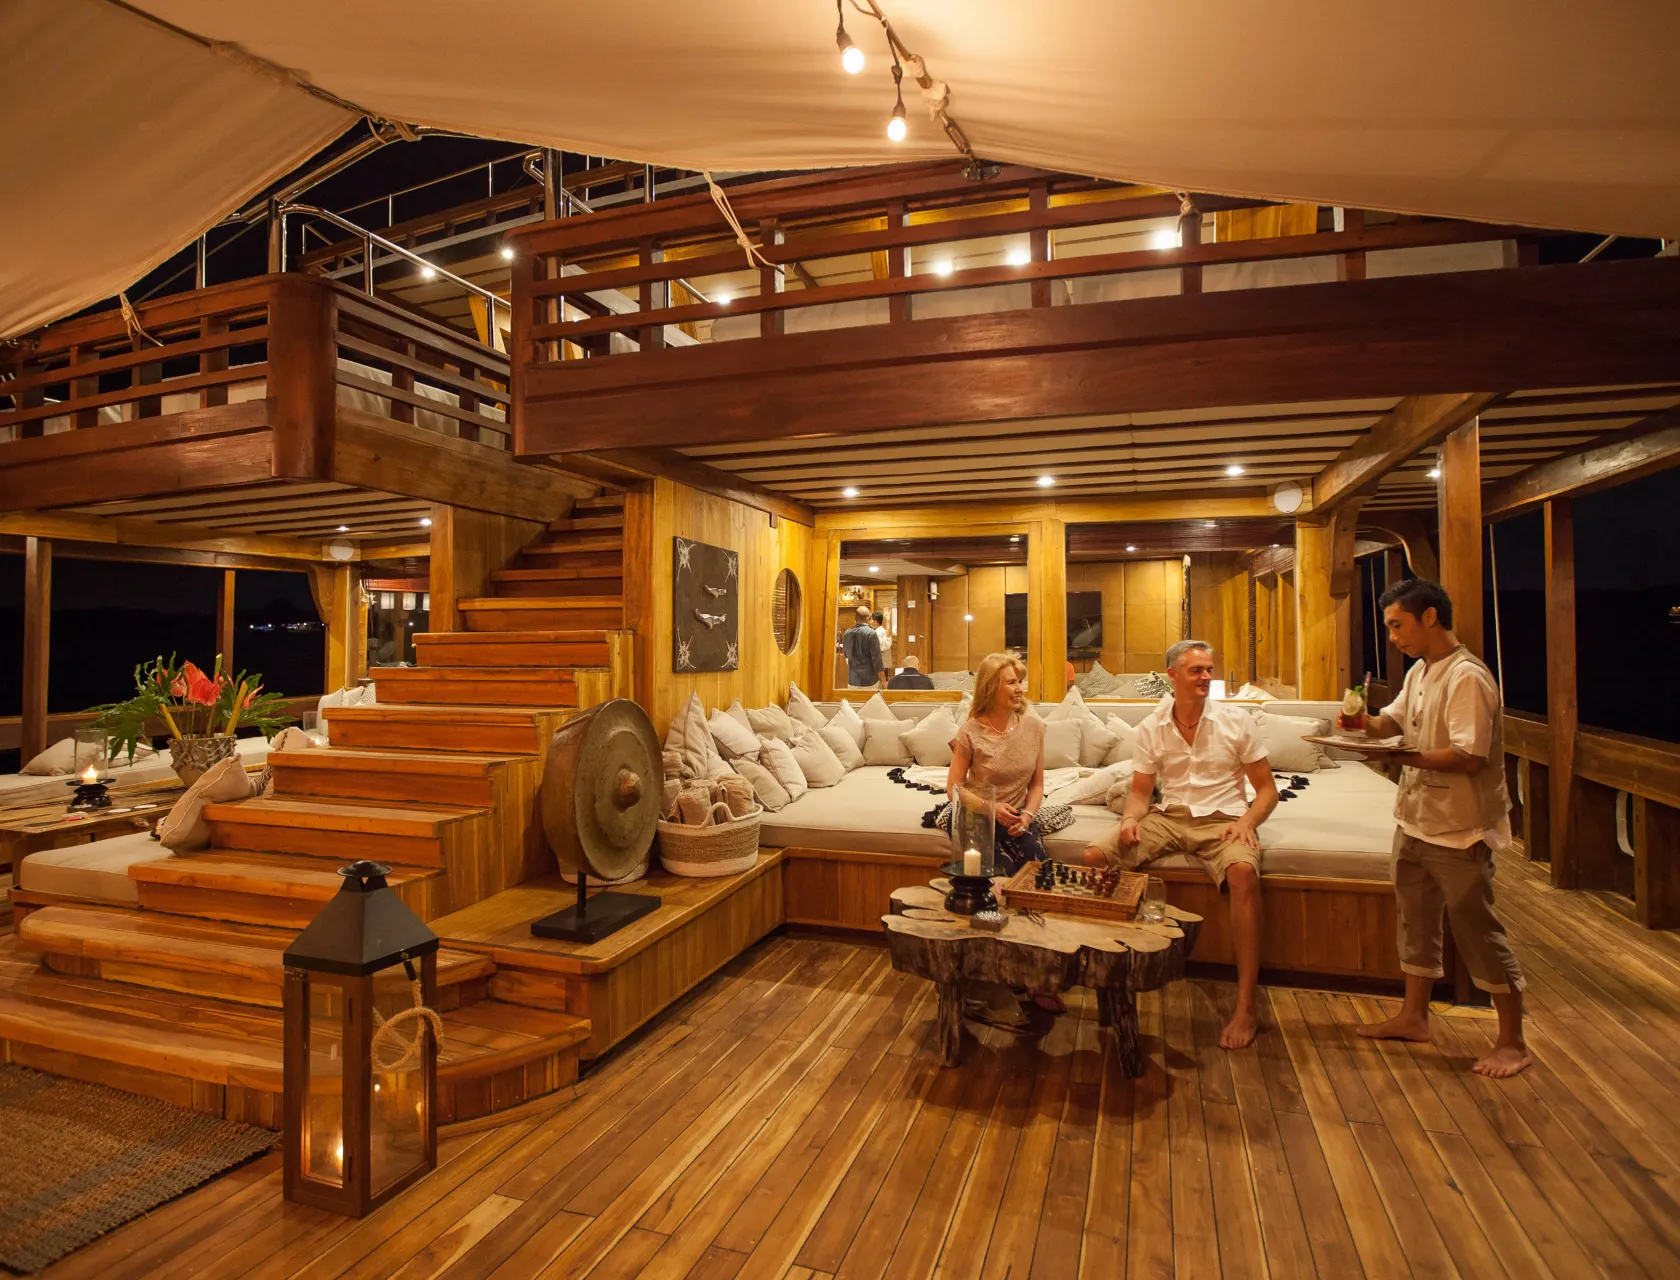 Top Evening Entertainment Experiences Aboard a Luxury Yacht